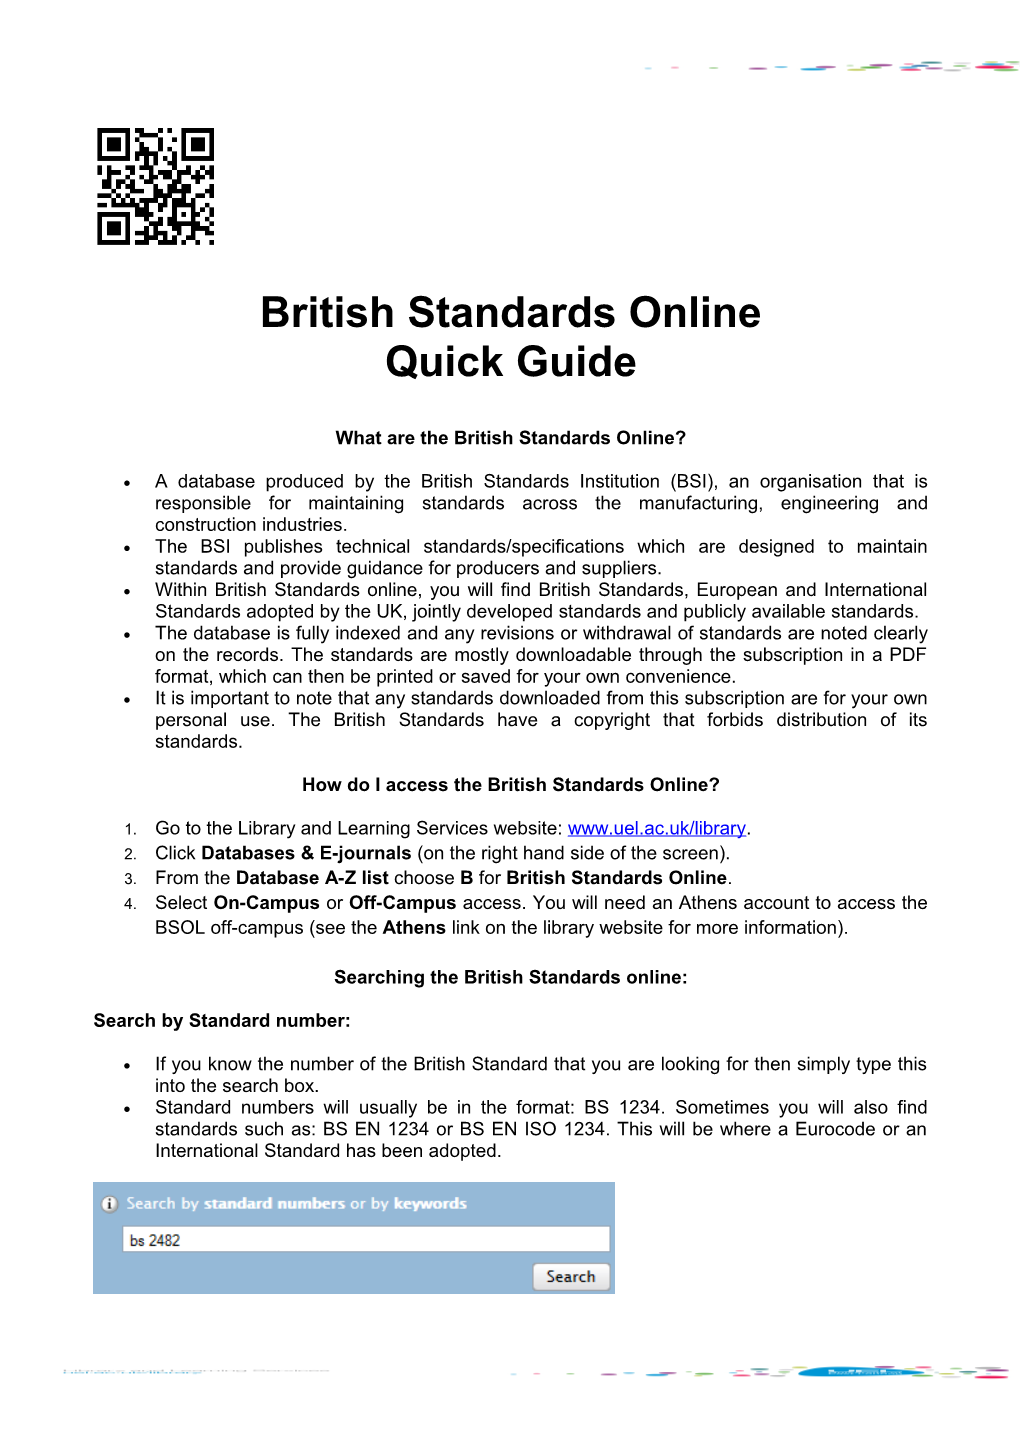 What Are the British Standards Online?